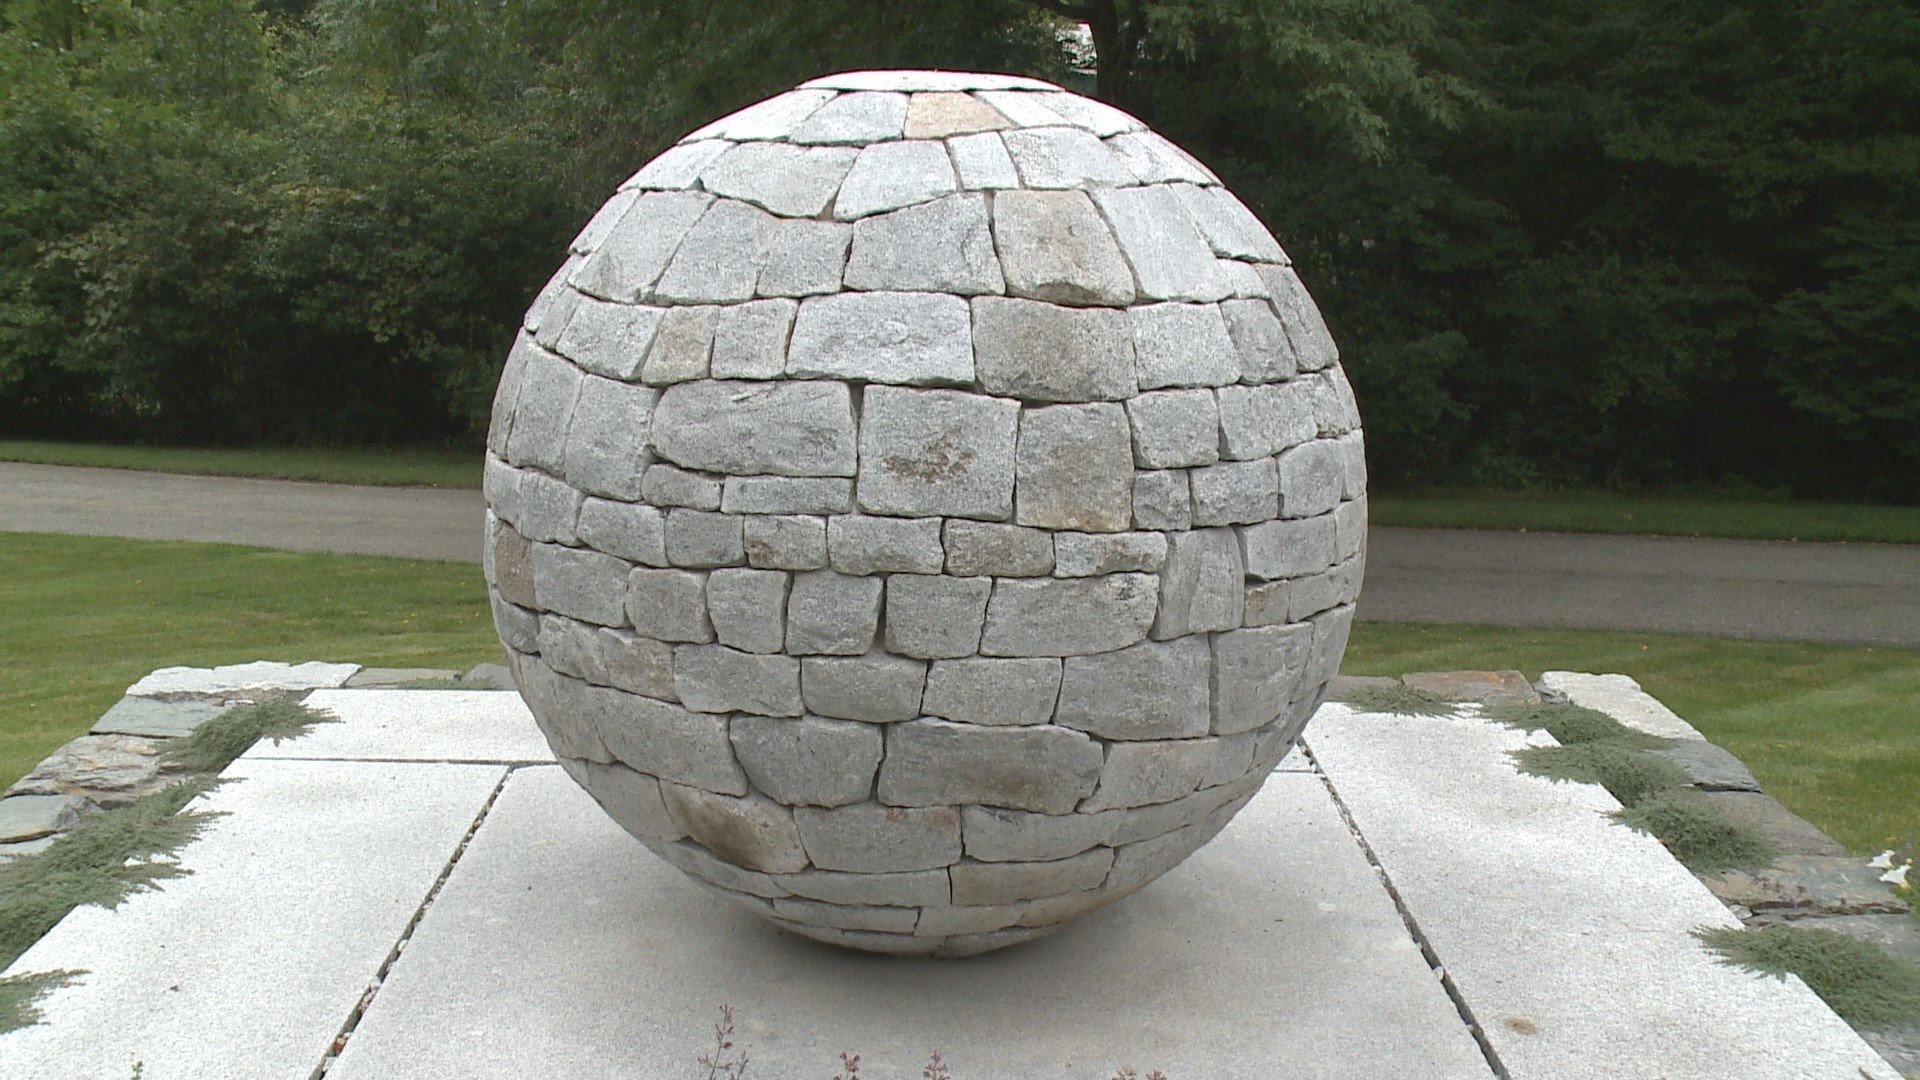 Gardening with Gutner talks with the owner and the artist who created The Sphere.